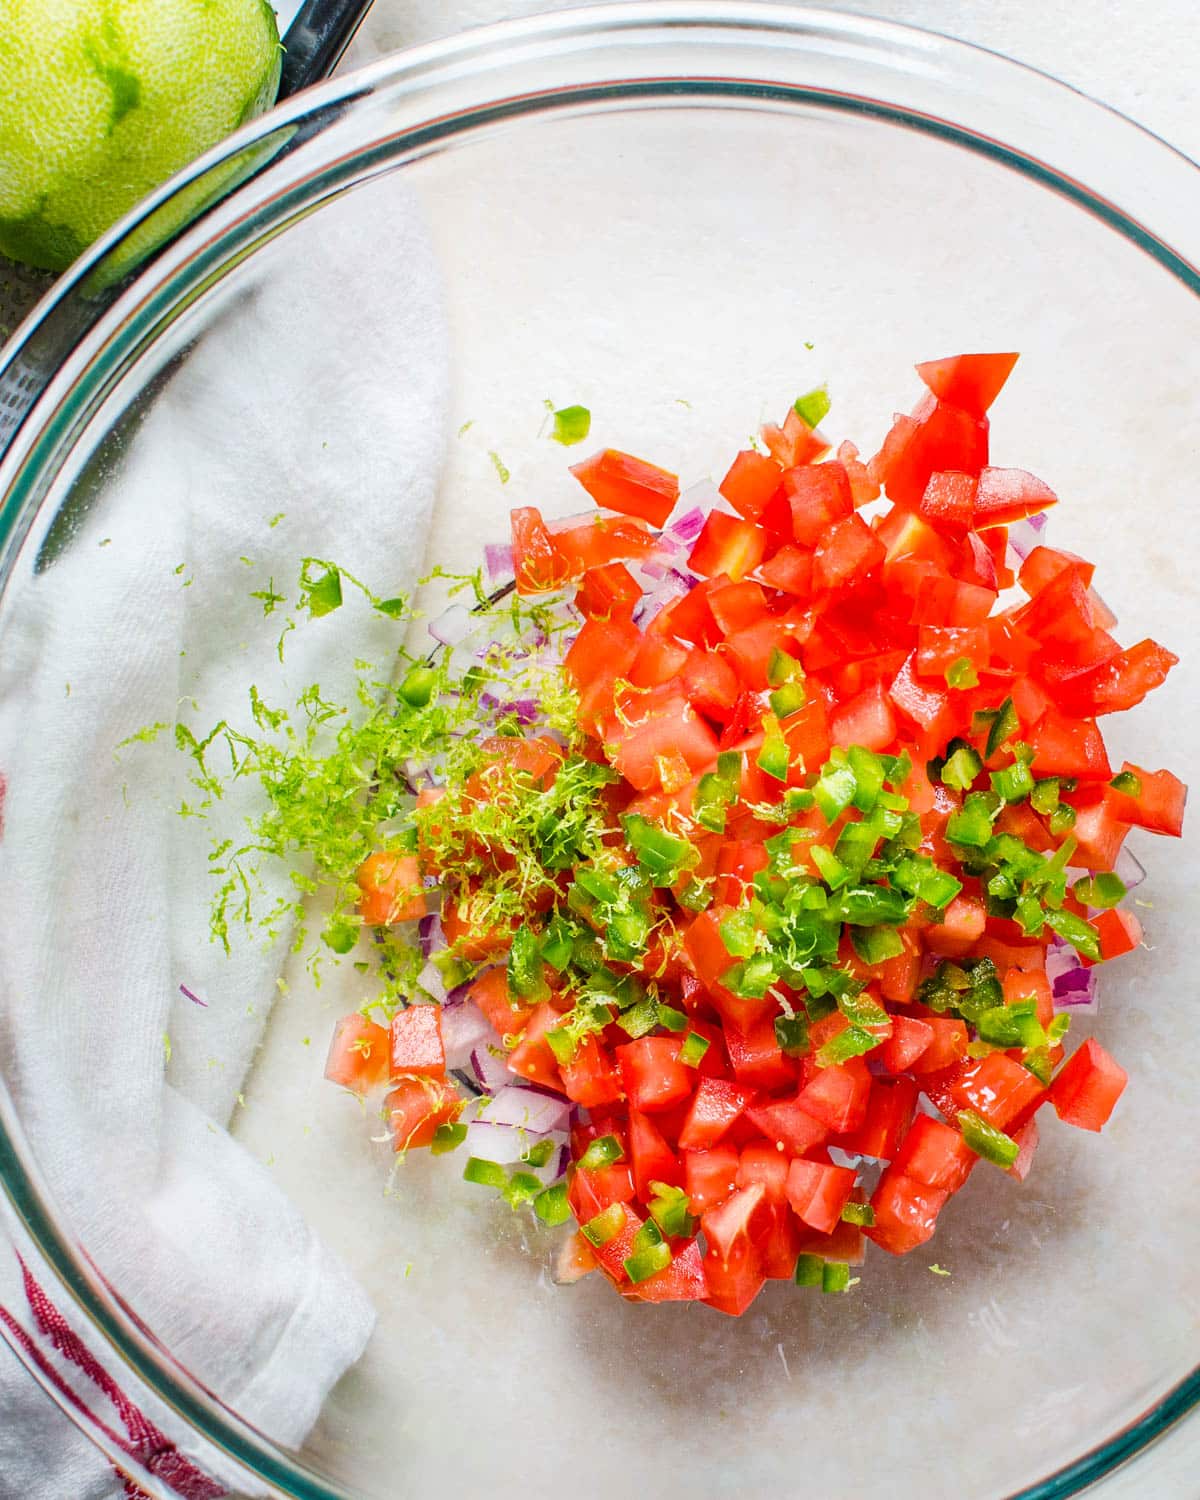 I am combining red onion, jalapeno, lime zest and diced tomatoes in a bowl.